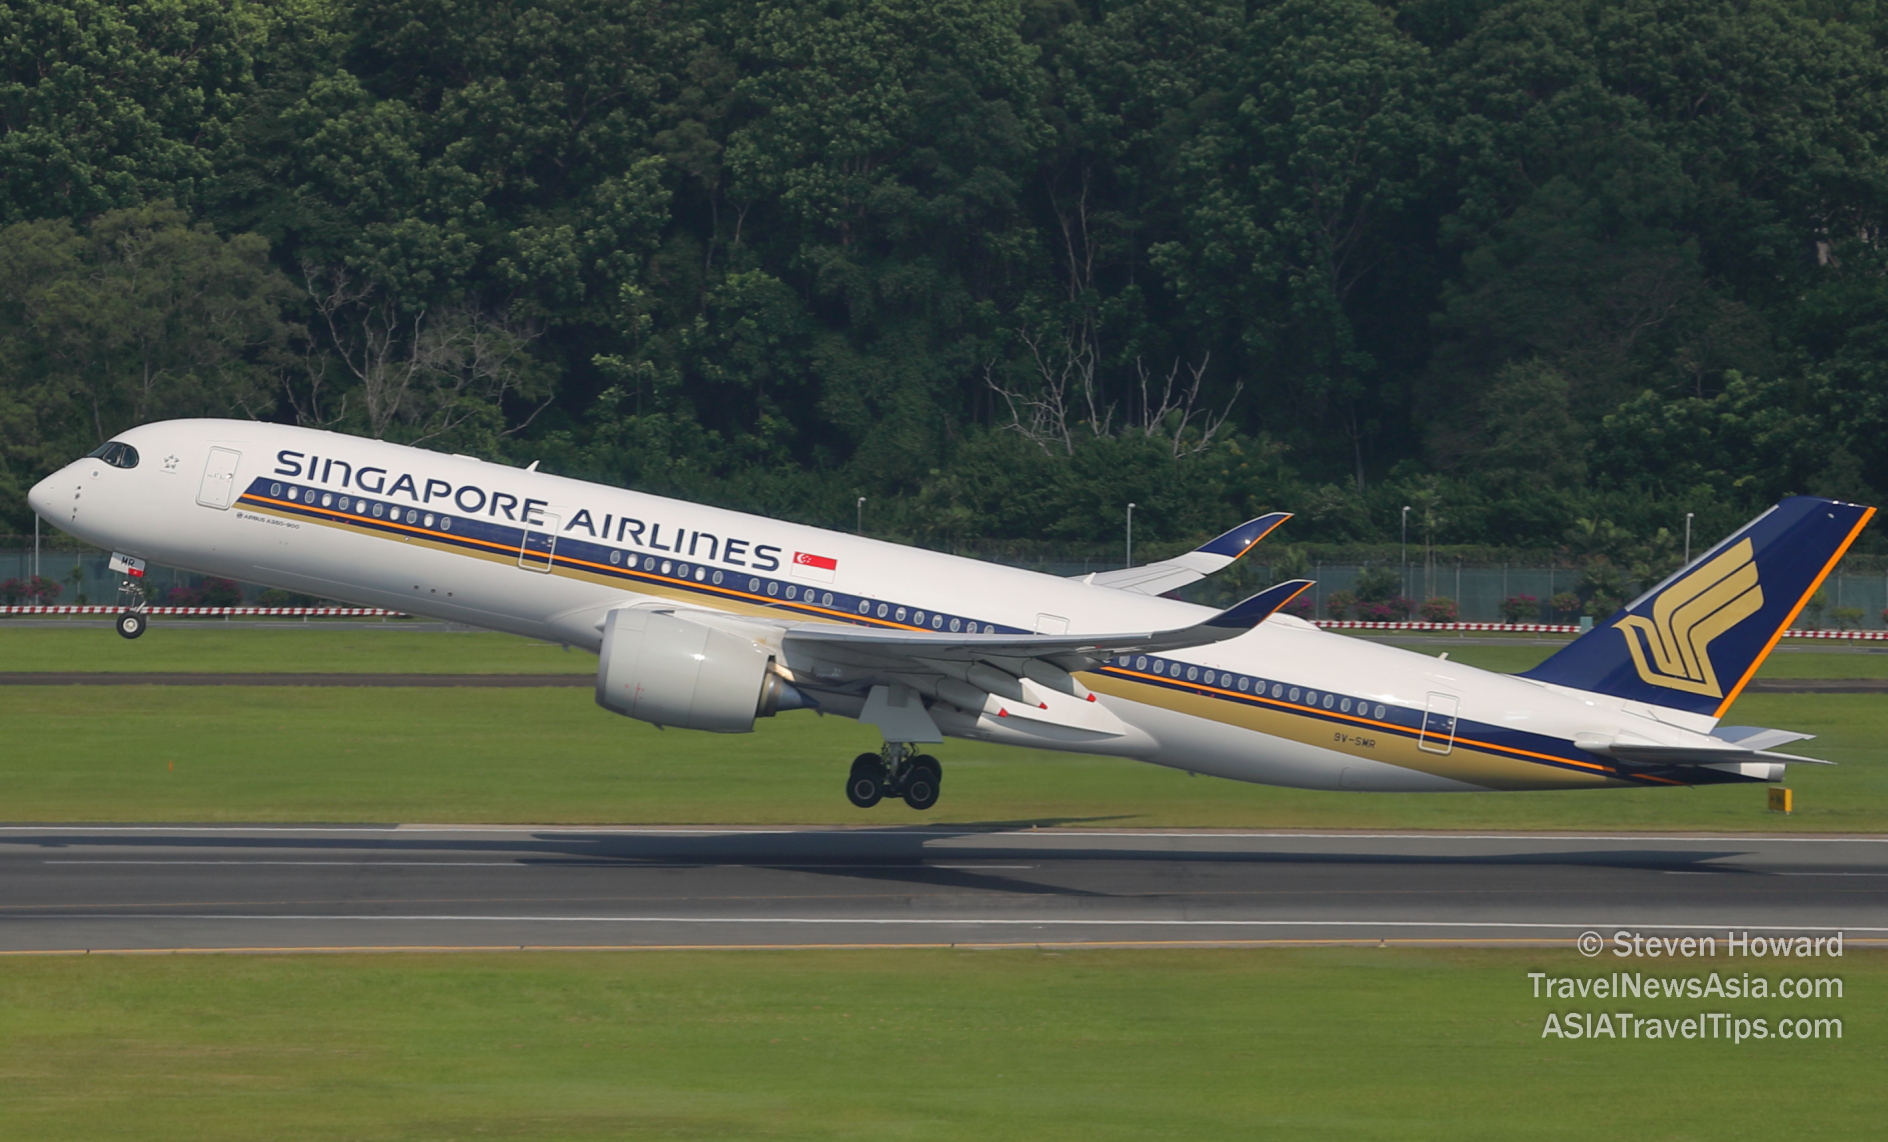 Singapore Airlines Airbus A350-900 reg: 9V-SMR. Picture by Steven Howard of TravelNewsAsia.com Click to enlarge.